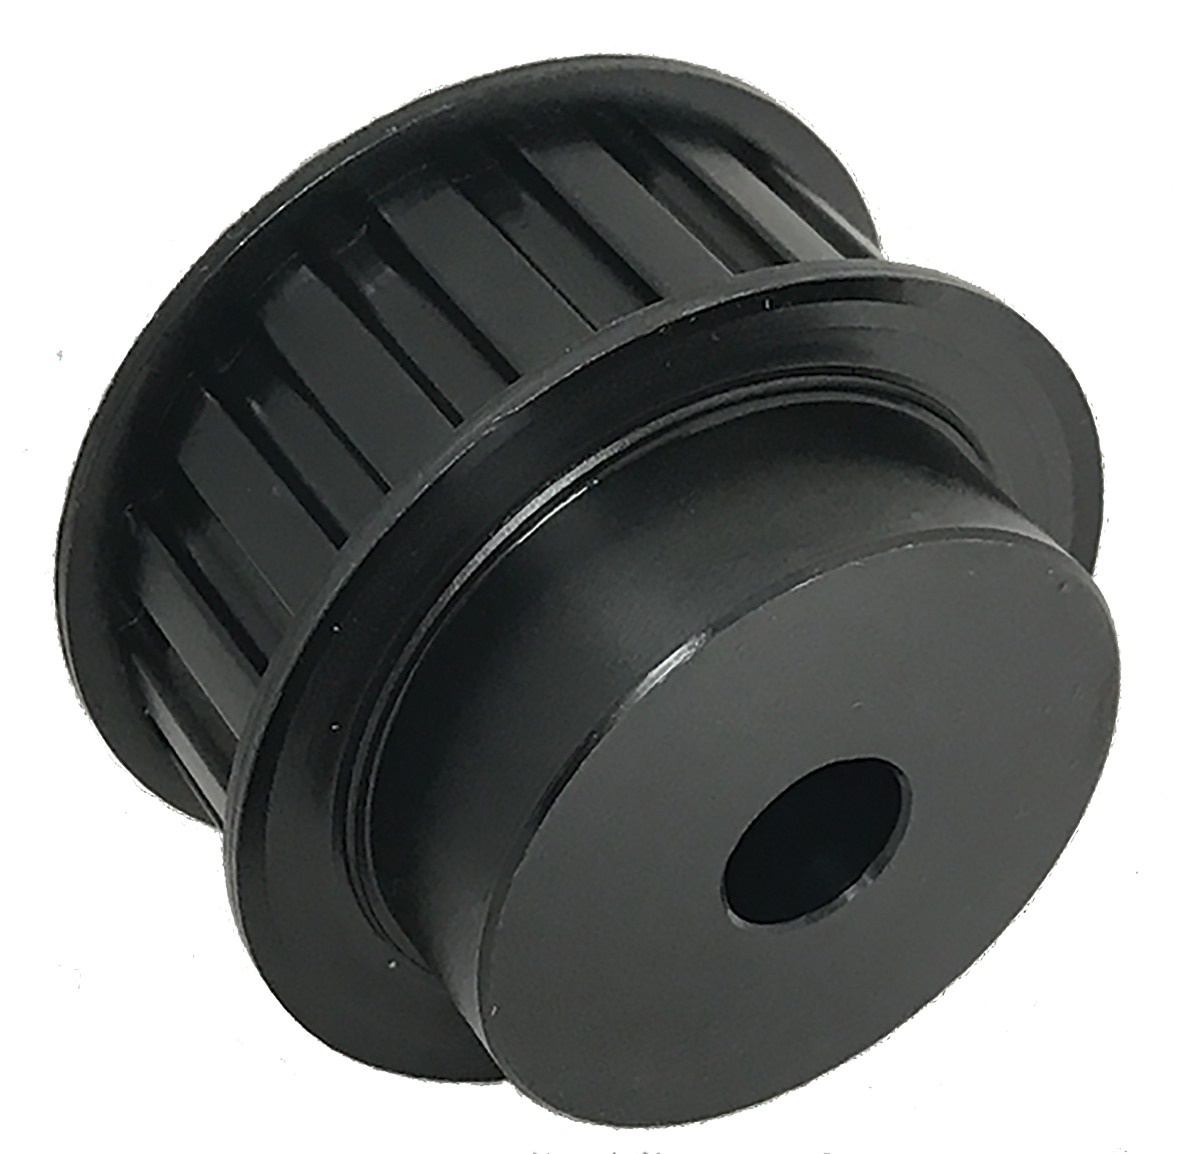 16H100-6FS7 - Steel Imperial Pitch Pulleys